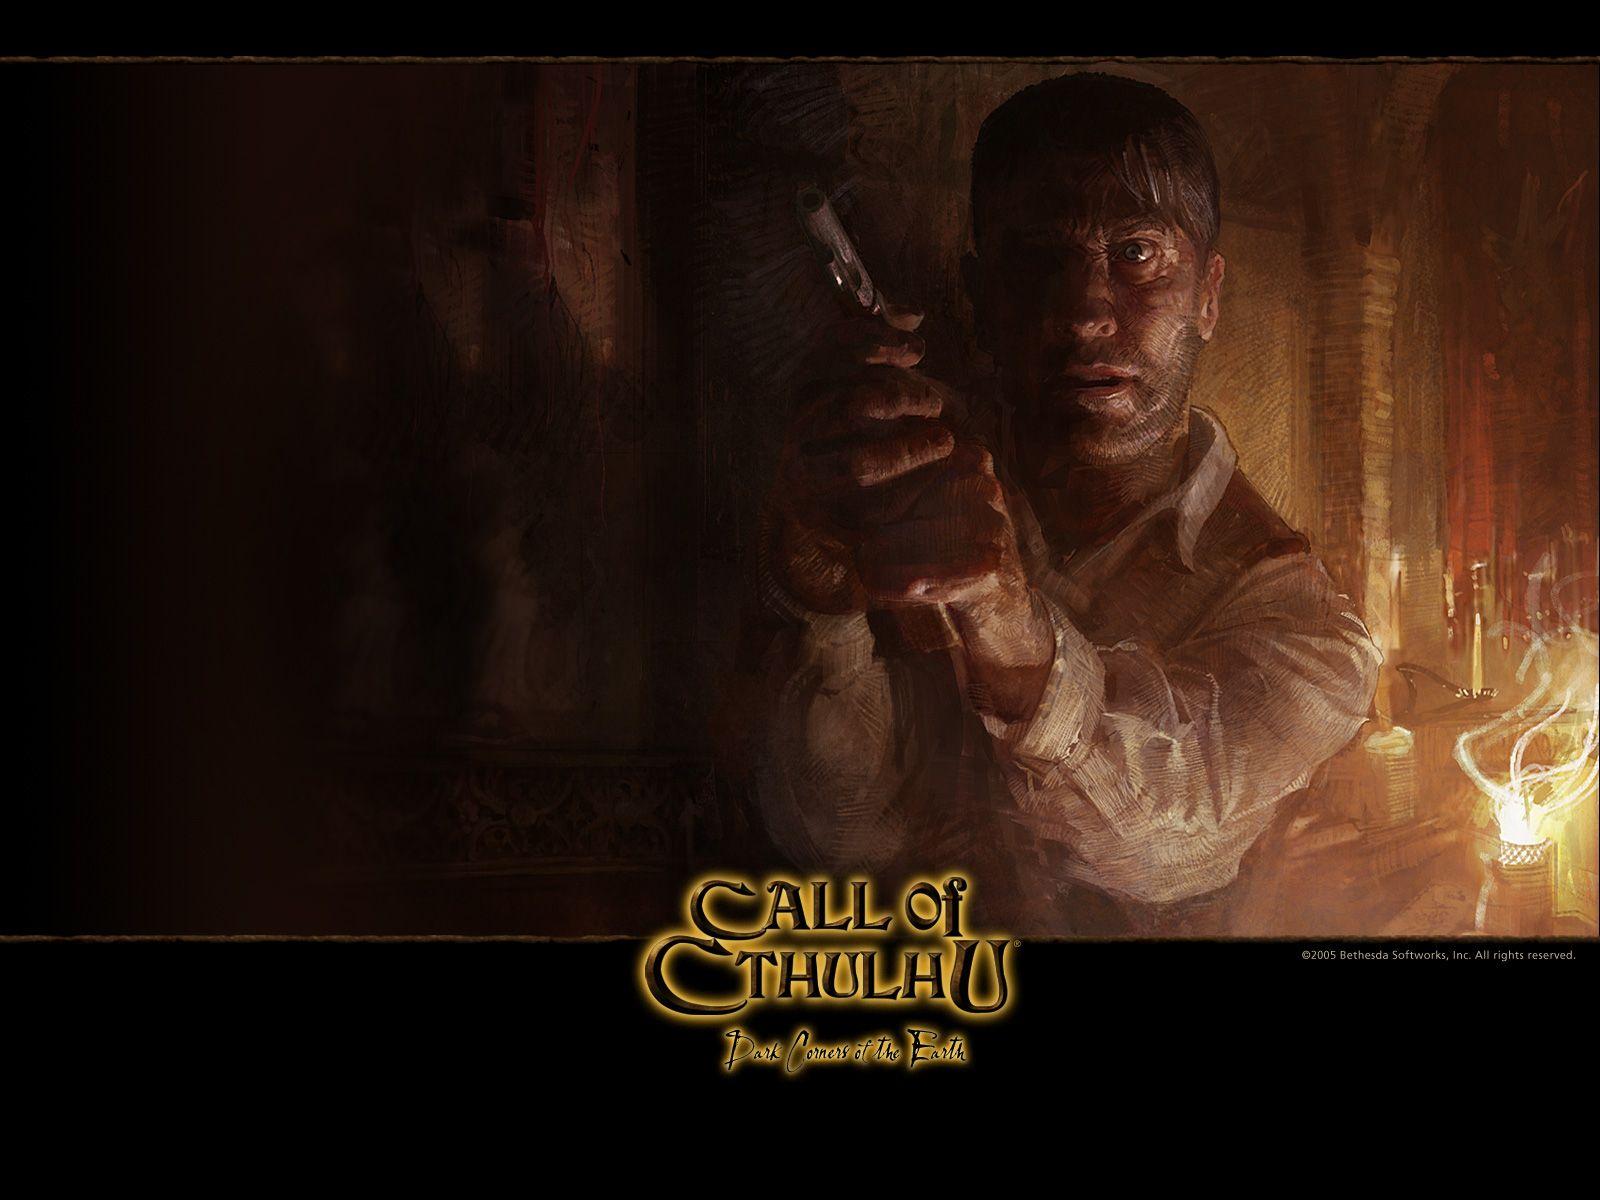 Call of Cthulhu: Dark Corners of the Earth (2005) promotional art